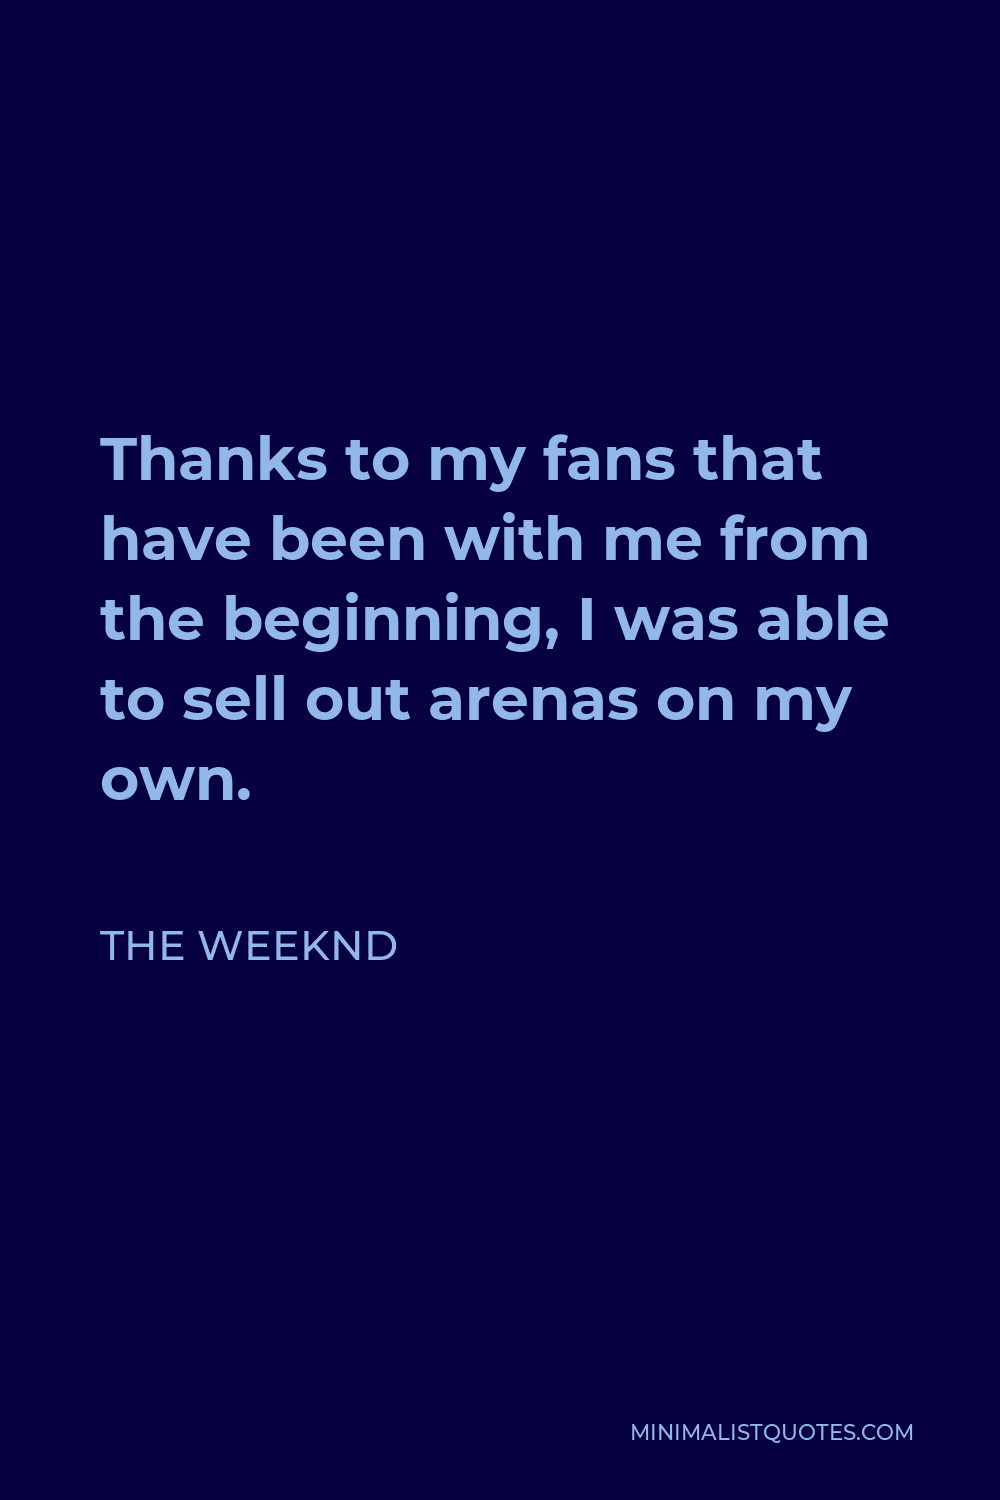 The Weeknd Quote - Thanks to my fans that have been with me from the beginning, I was able to sell out arenas on my own.